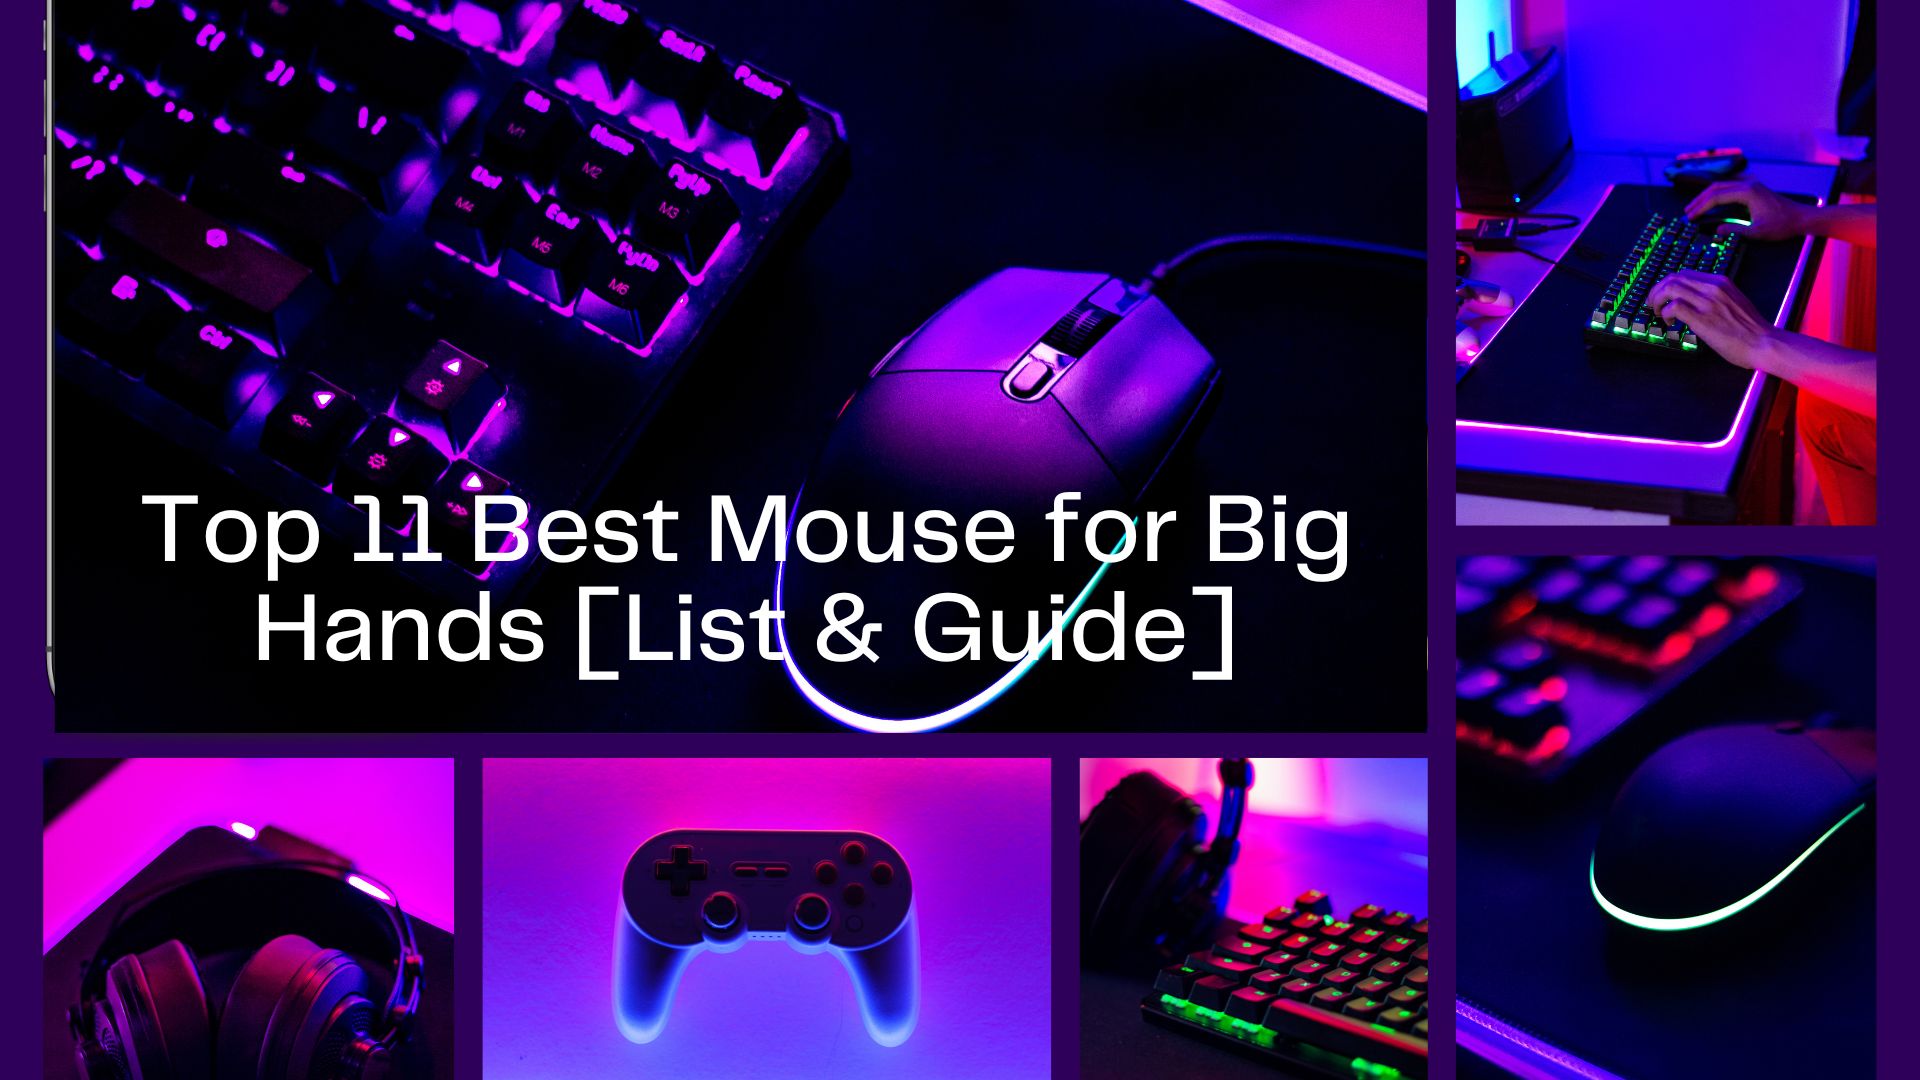 Top 11 Best Mouse for Big Hands [List & Guide]